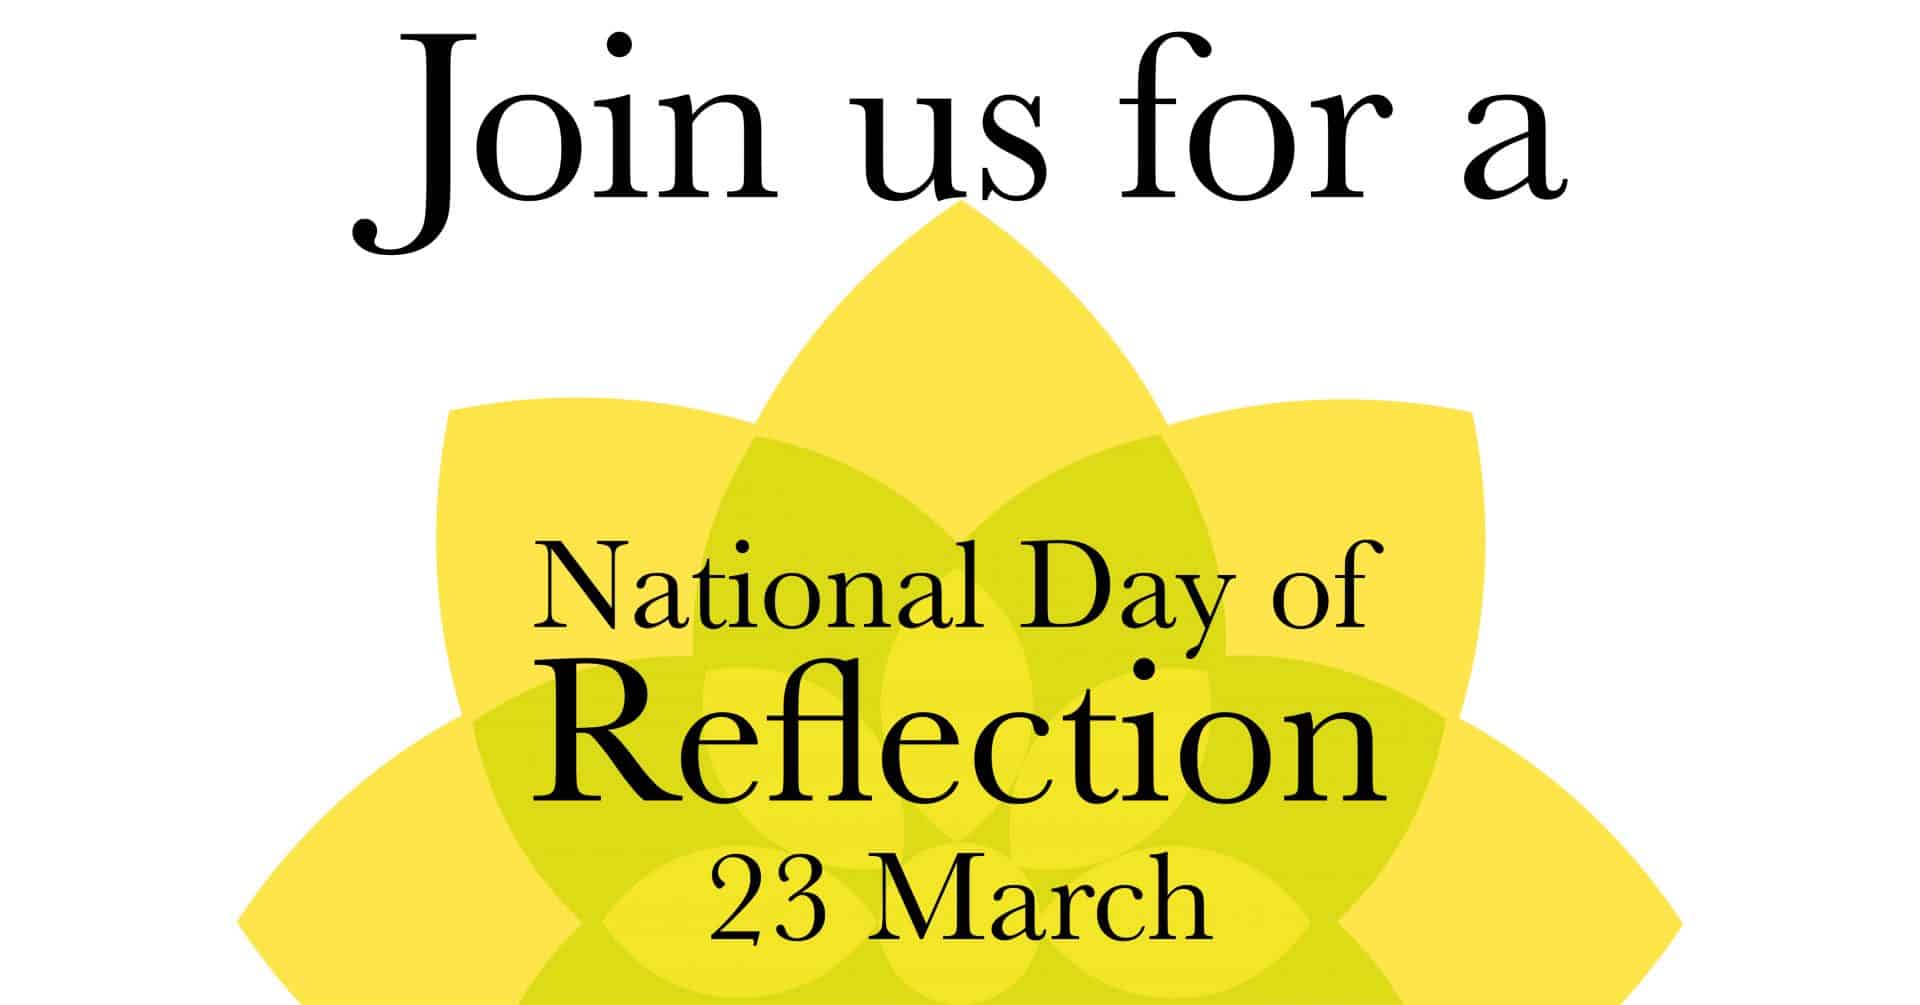 National Day of Reflection logo